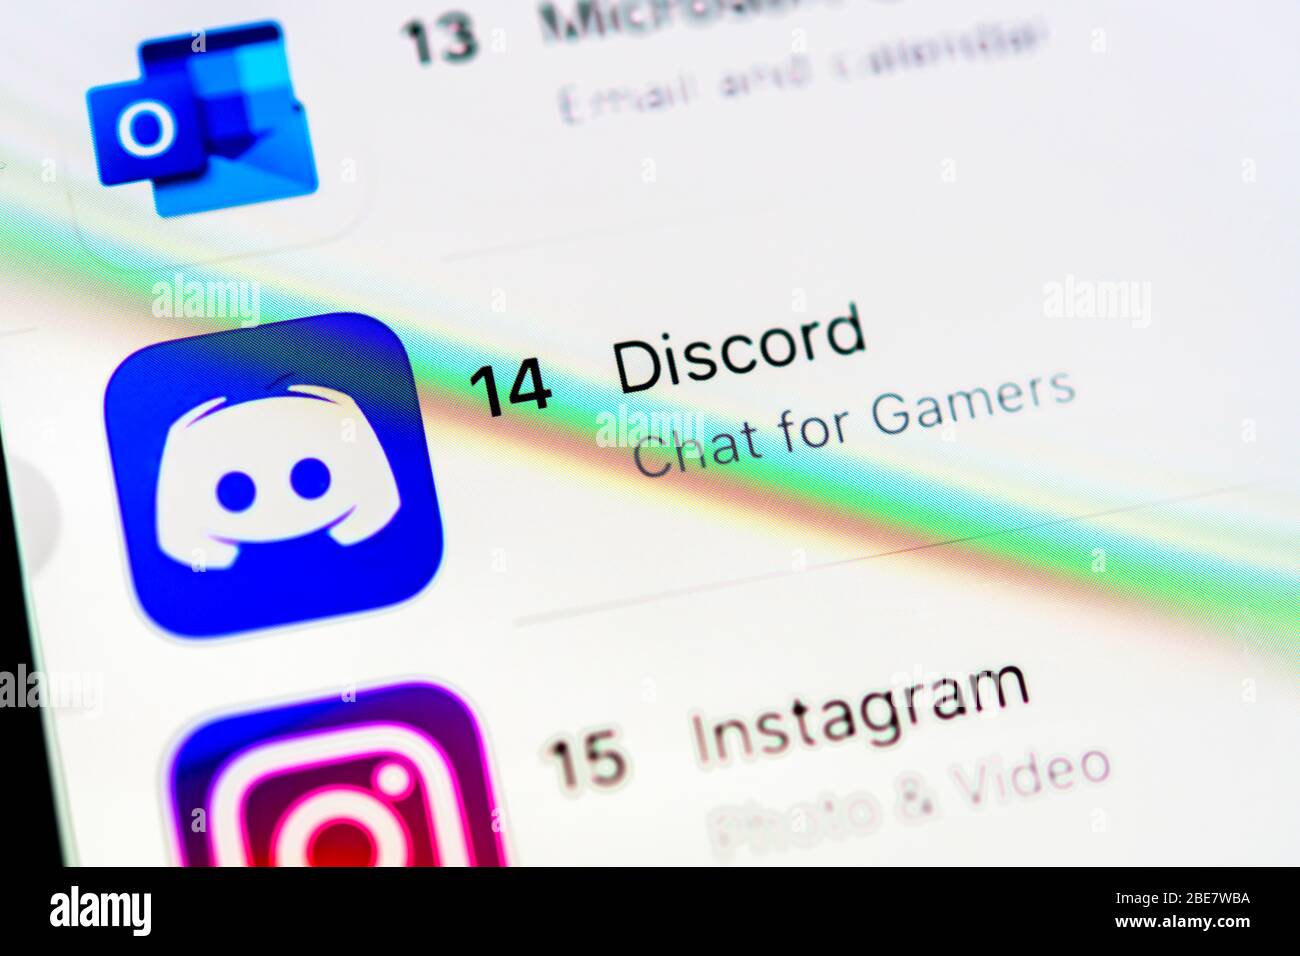 Discord App App Icon Display On Display Of Mobile Phone